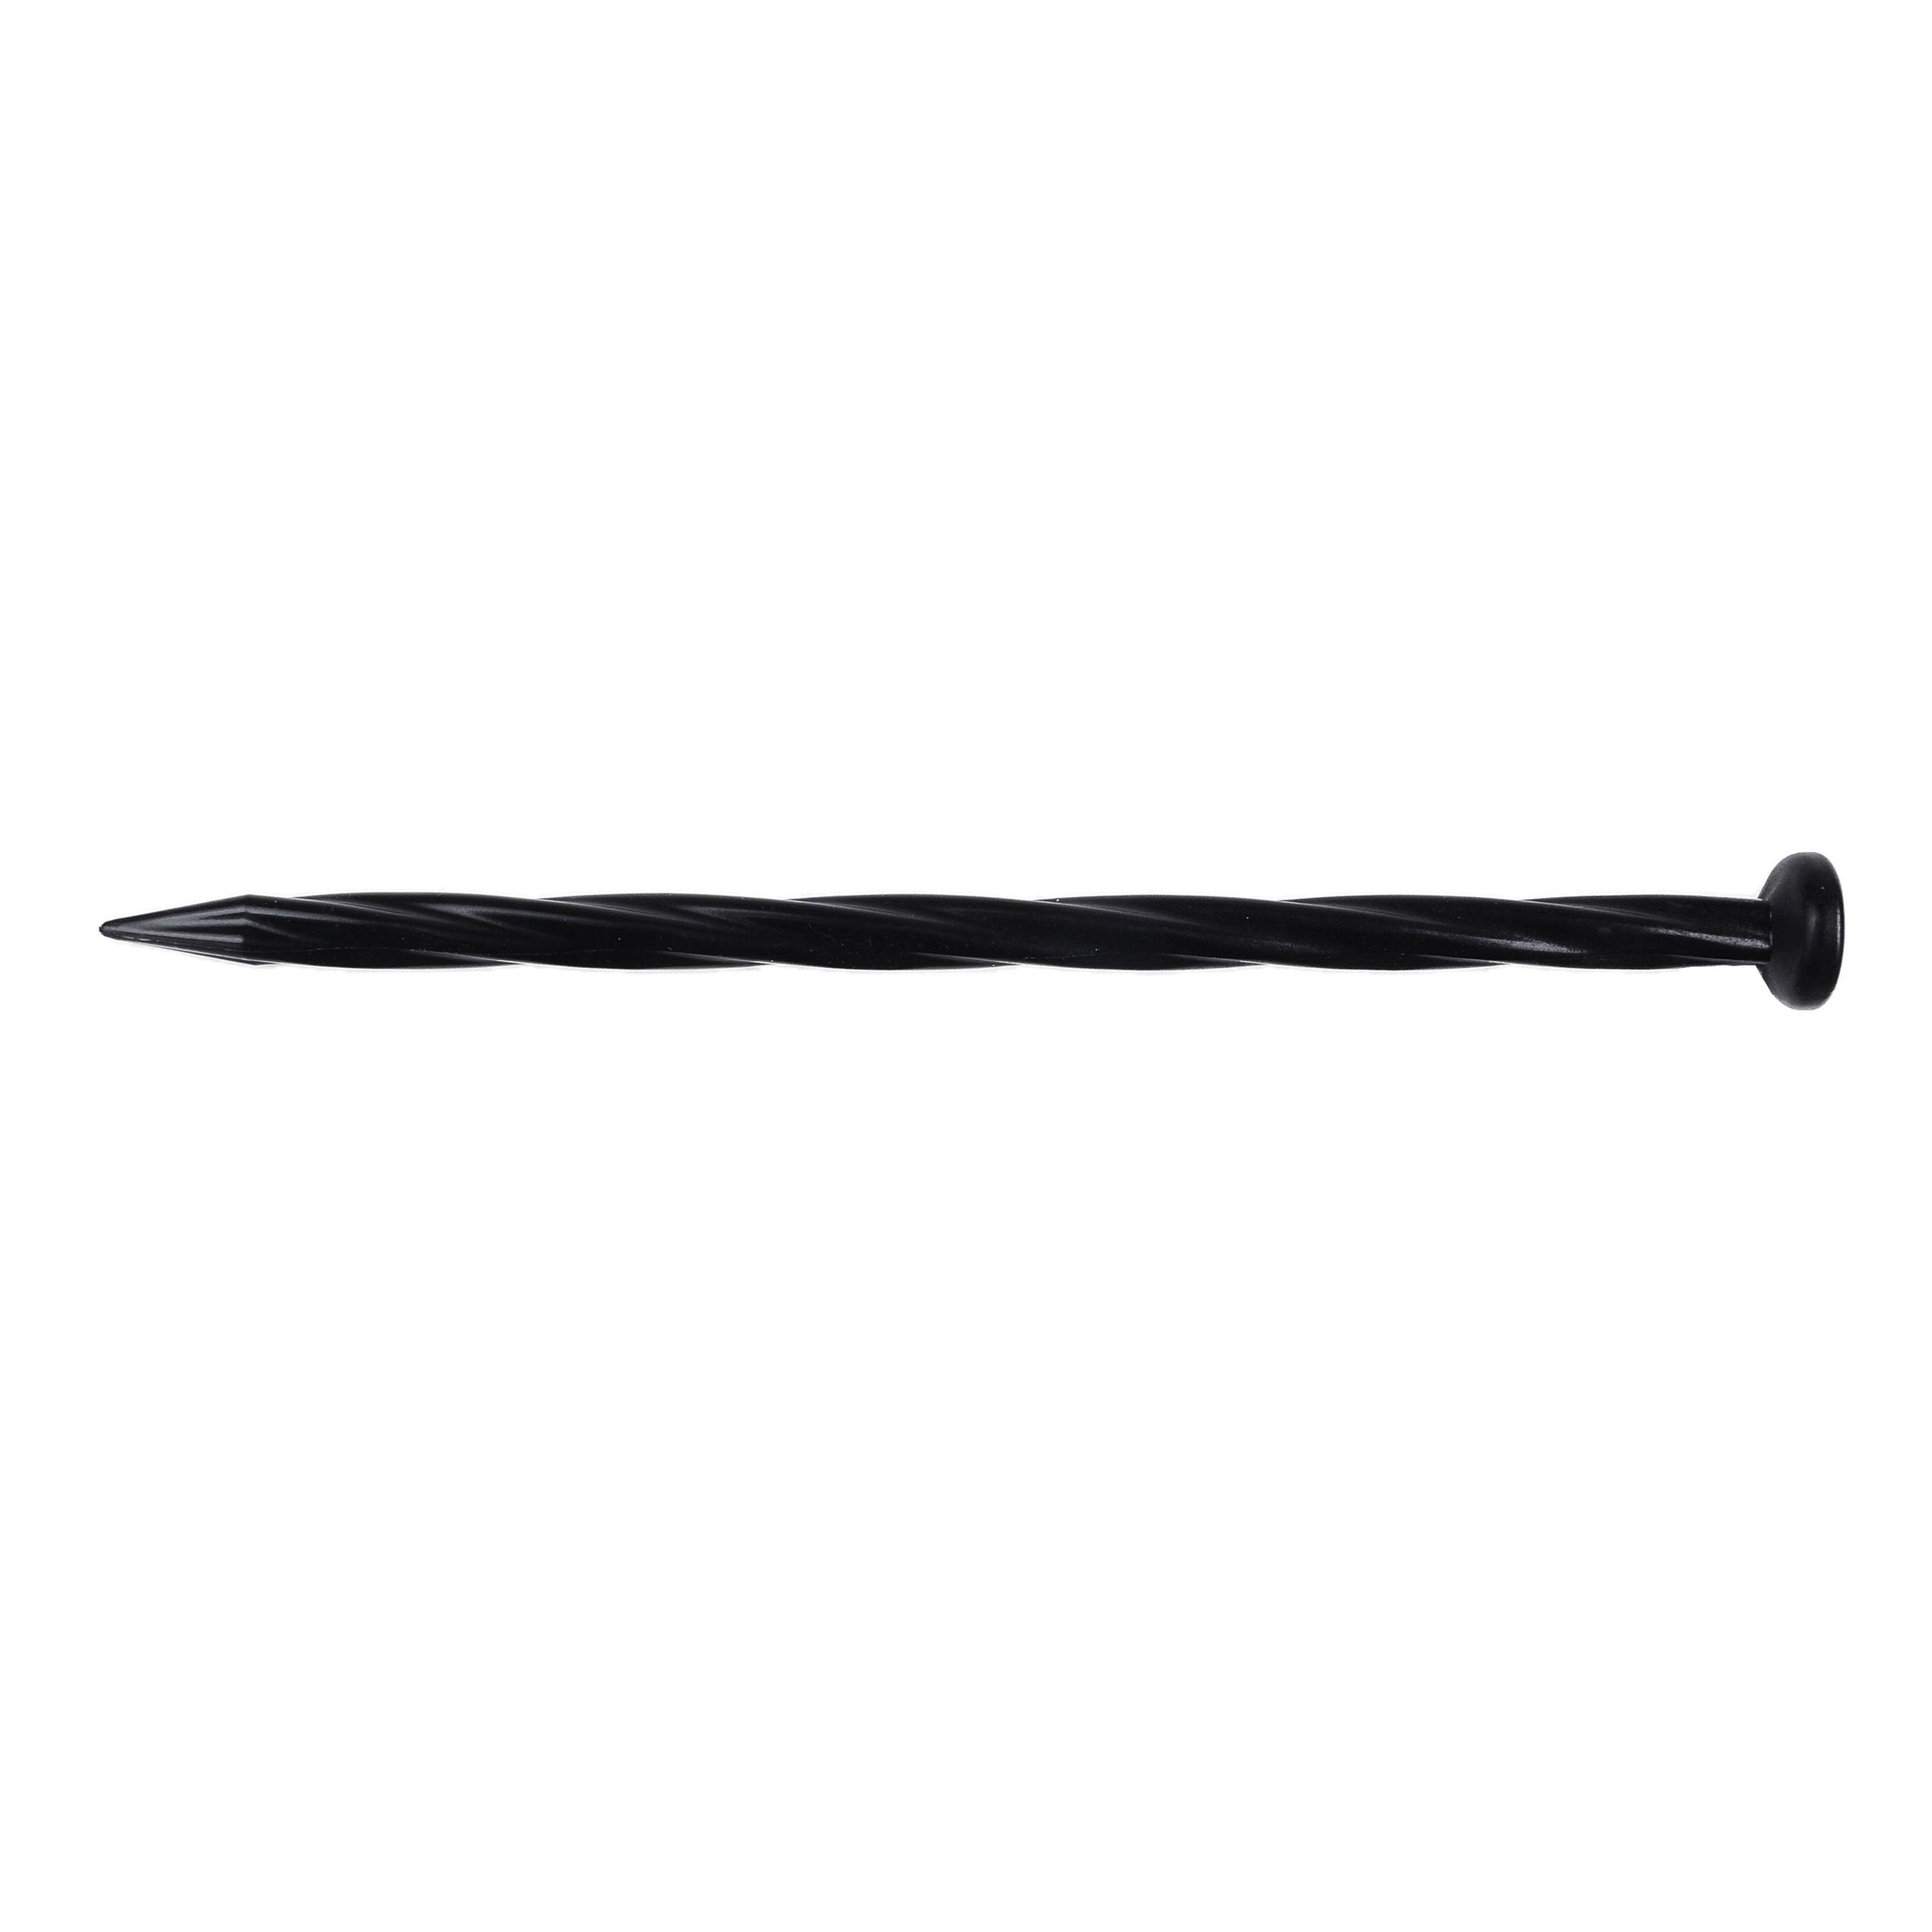 AgTec 6 Black Plastic Fabric Anchoring Stakes (Bag of 100